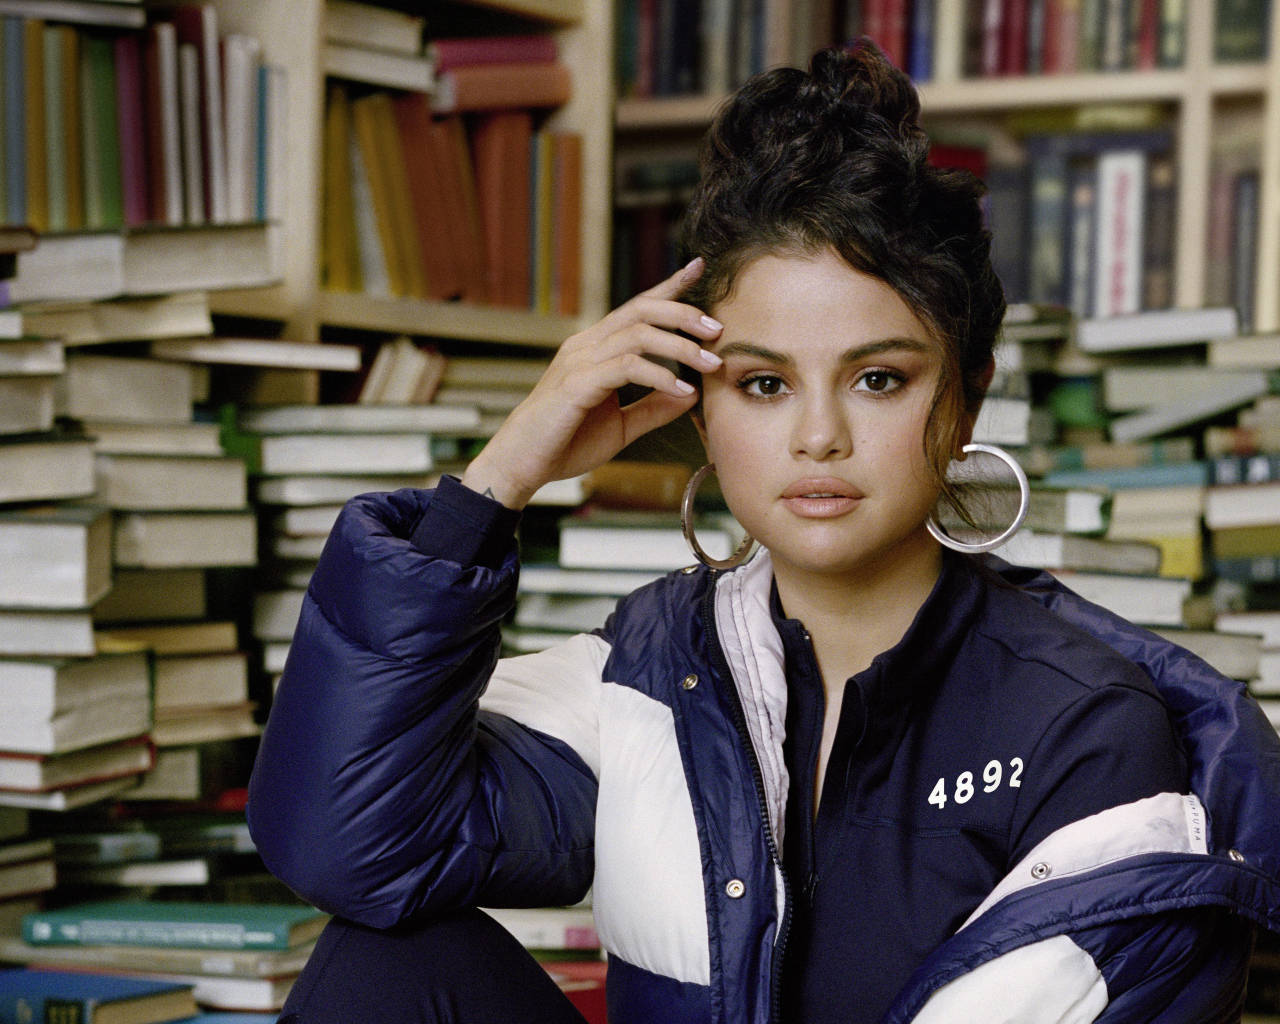 Actress and singer Selena Gomez in a jacket sits in a library